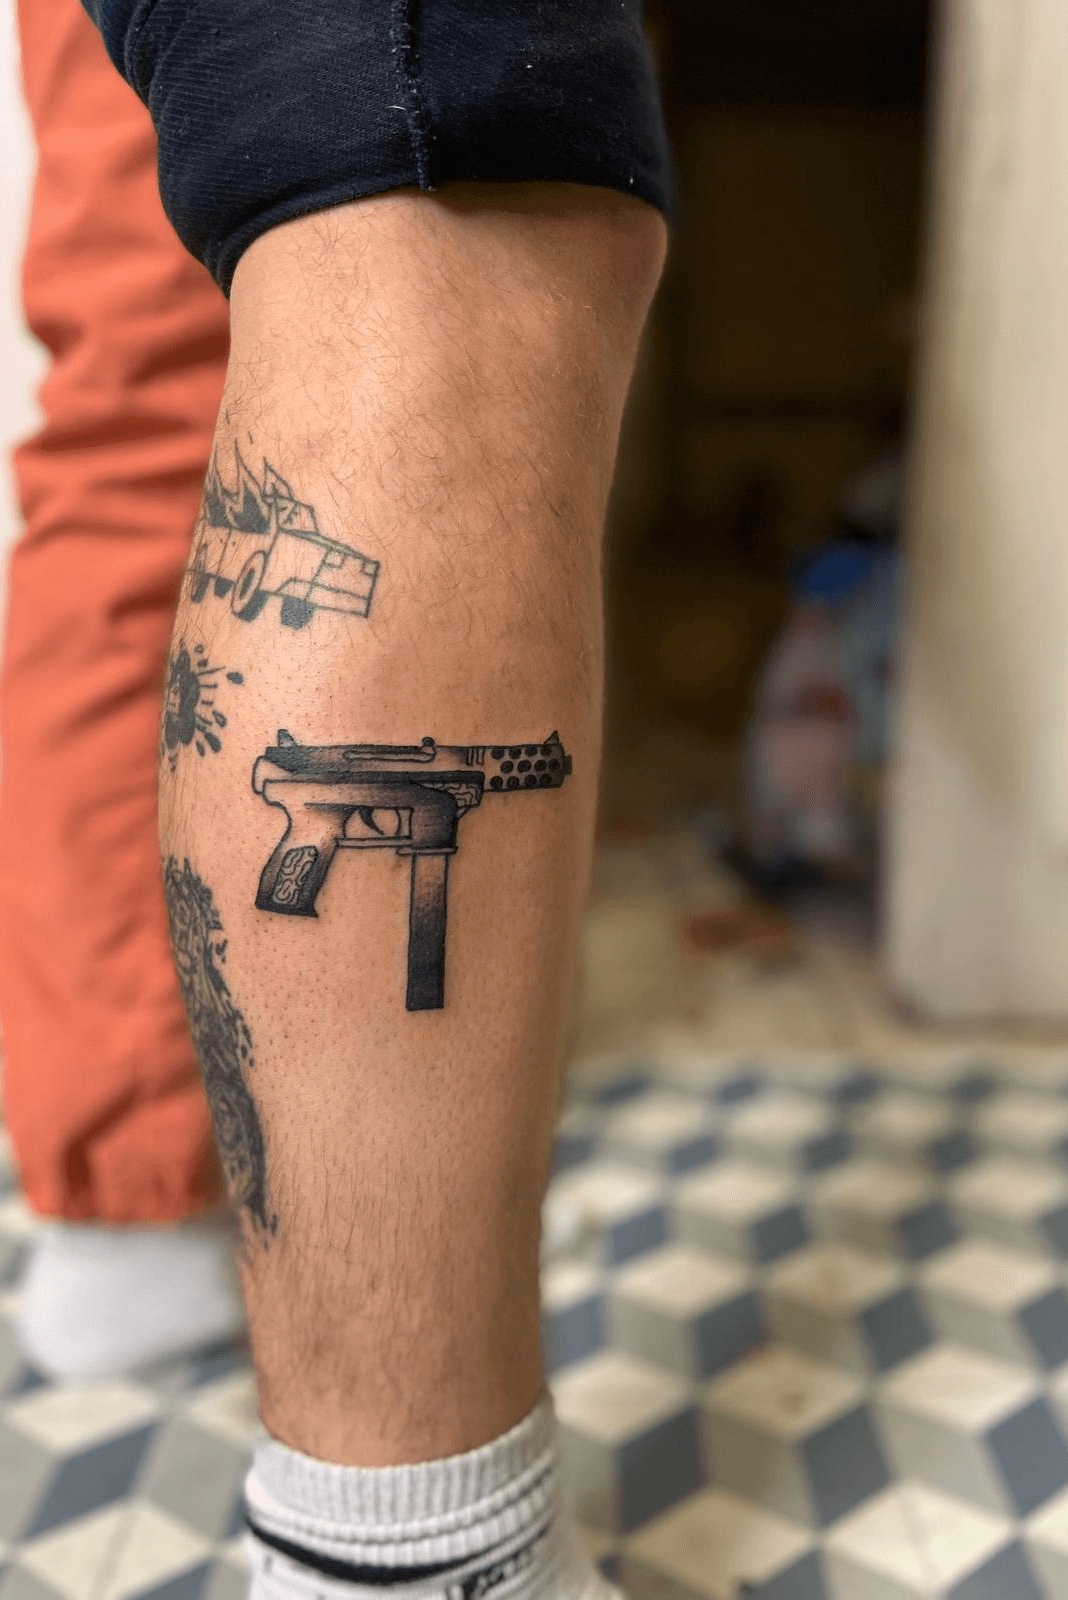 23 Guns Tattoo Closed Down in Chandigarh Sector 7Chandigarh  Best in  Chandigarh  Justdial